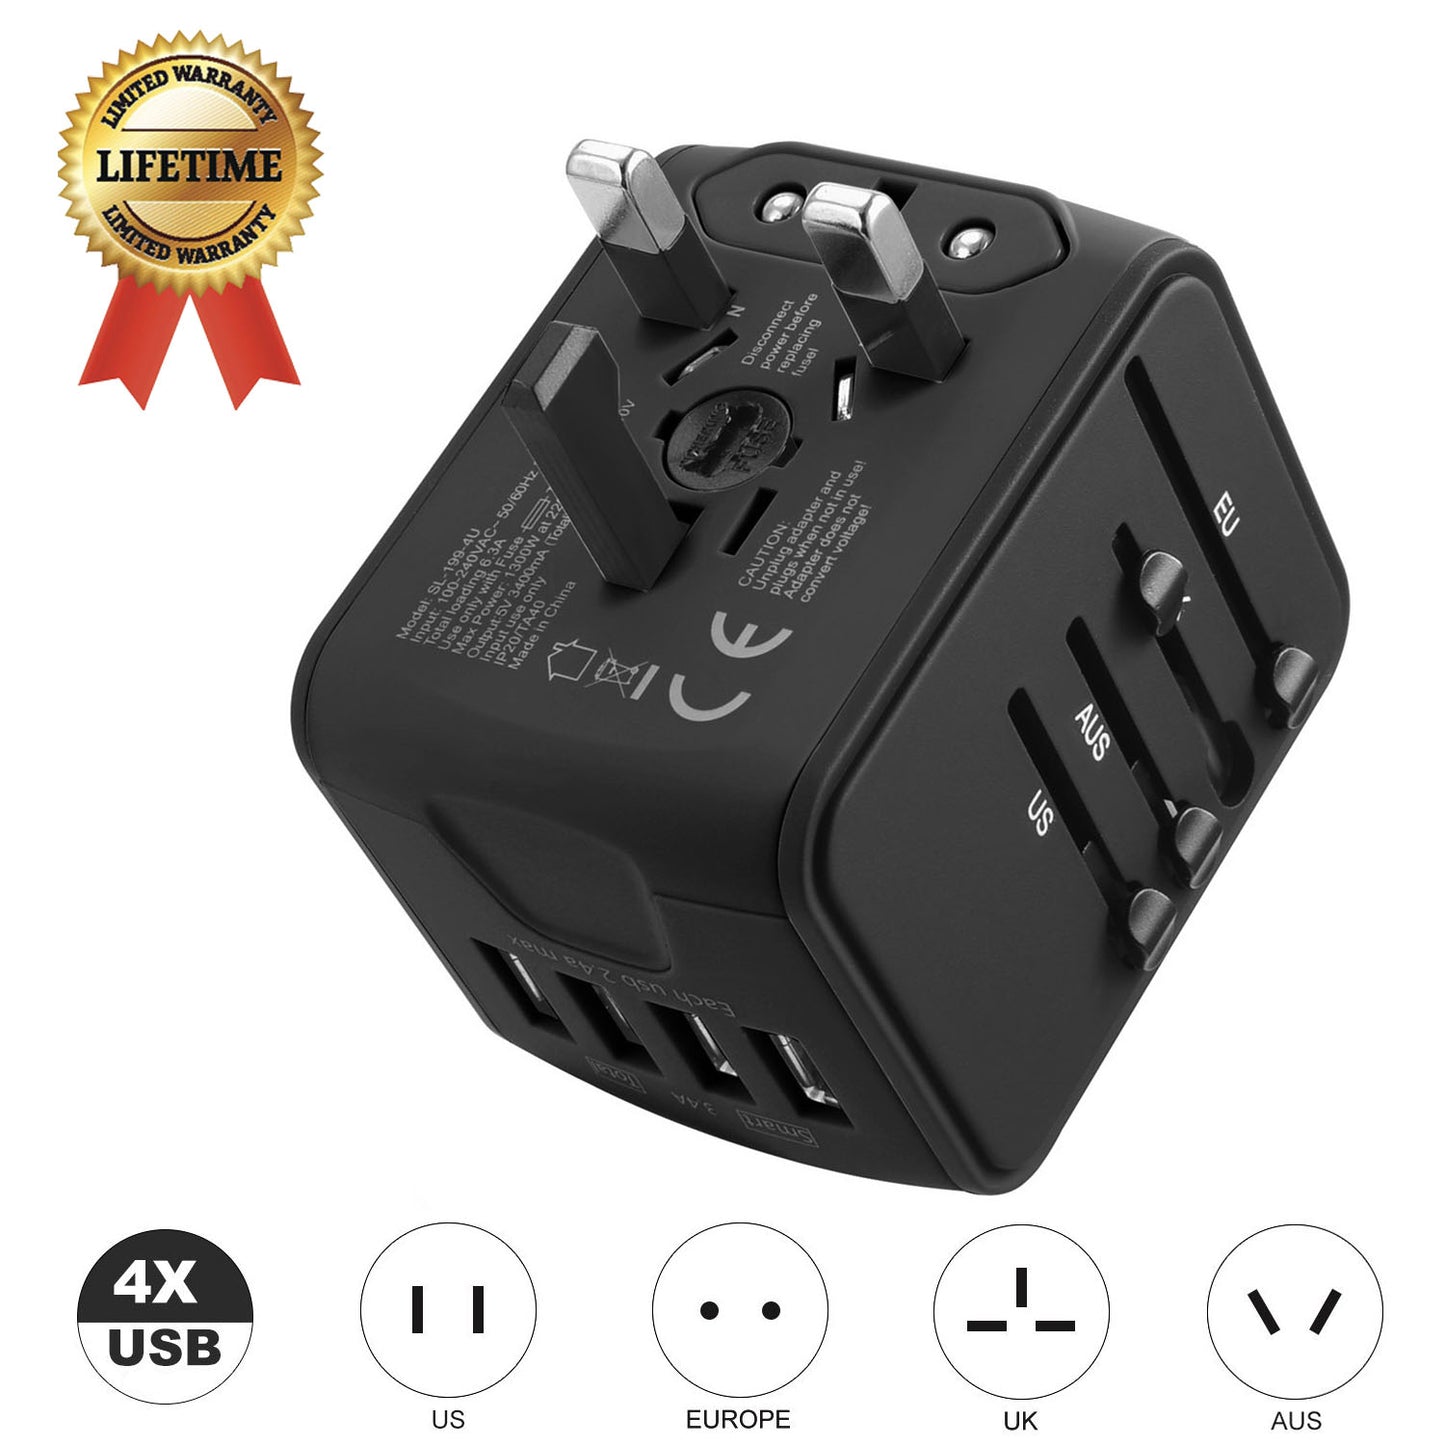 International Travel Adapter Universal Power Adapter Worldwide All in One 4 USB with Electrical Plug Perfect for European US, EU, UK, AU 160 Countries (Black)